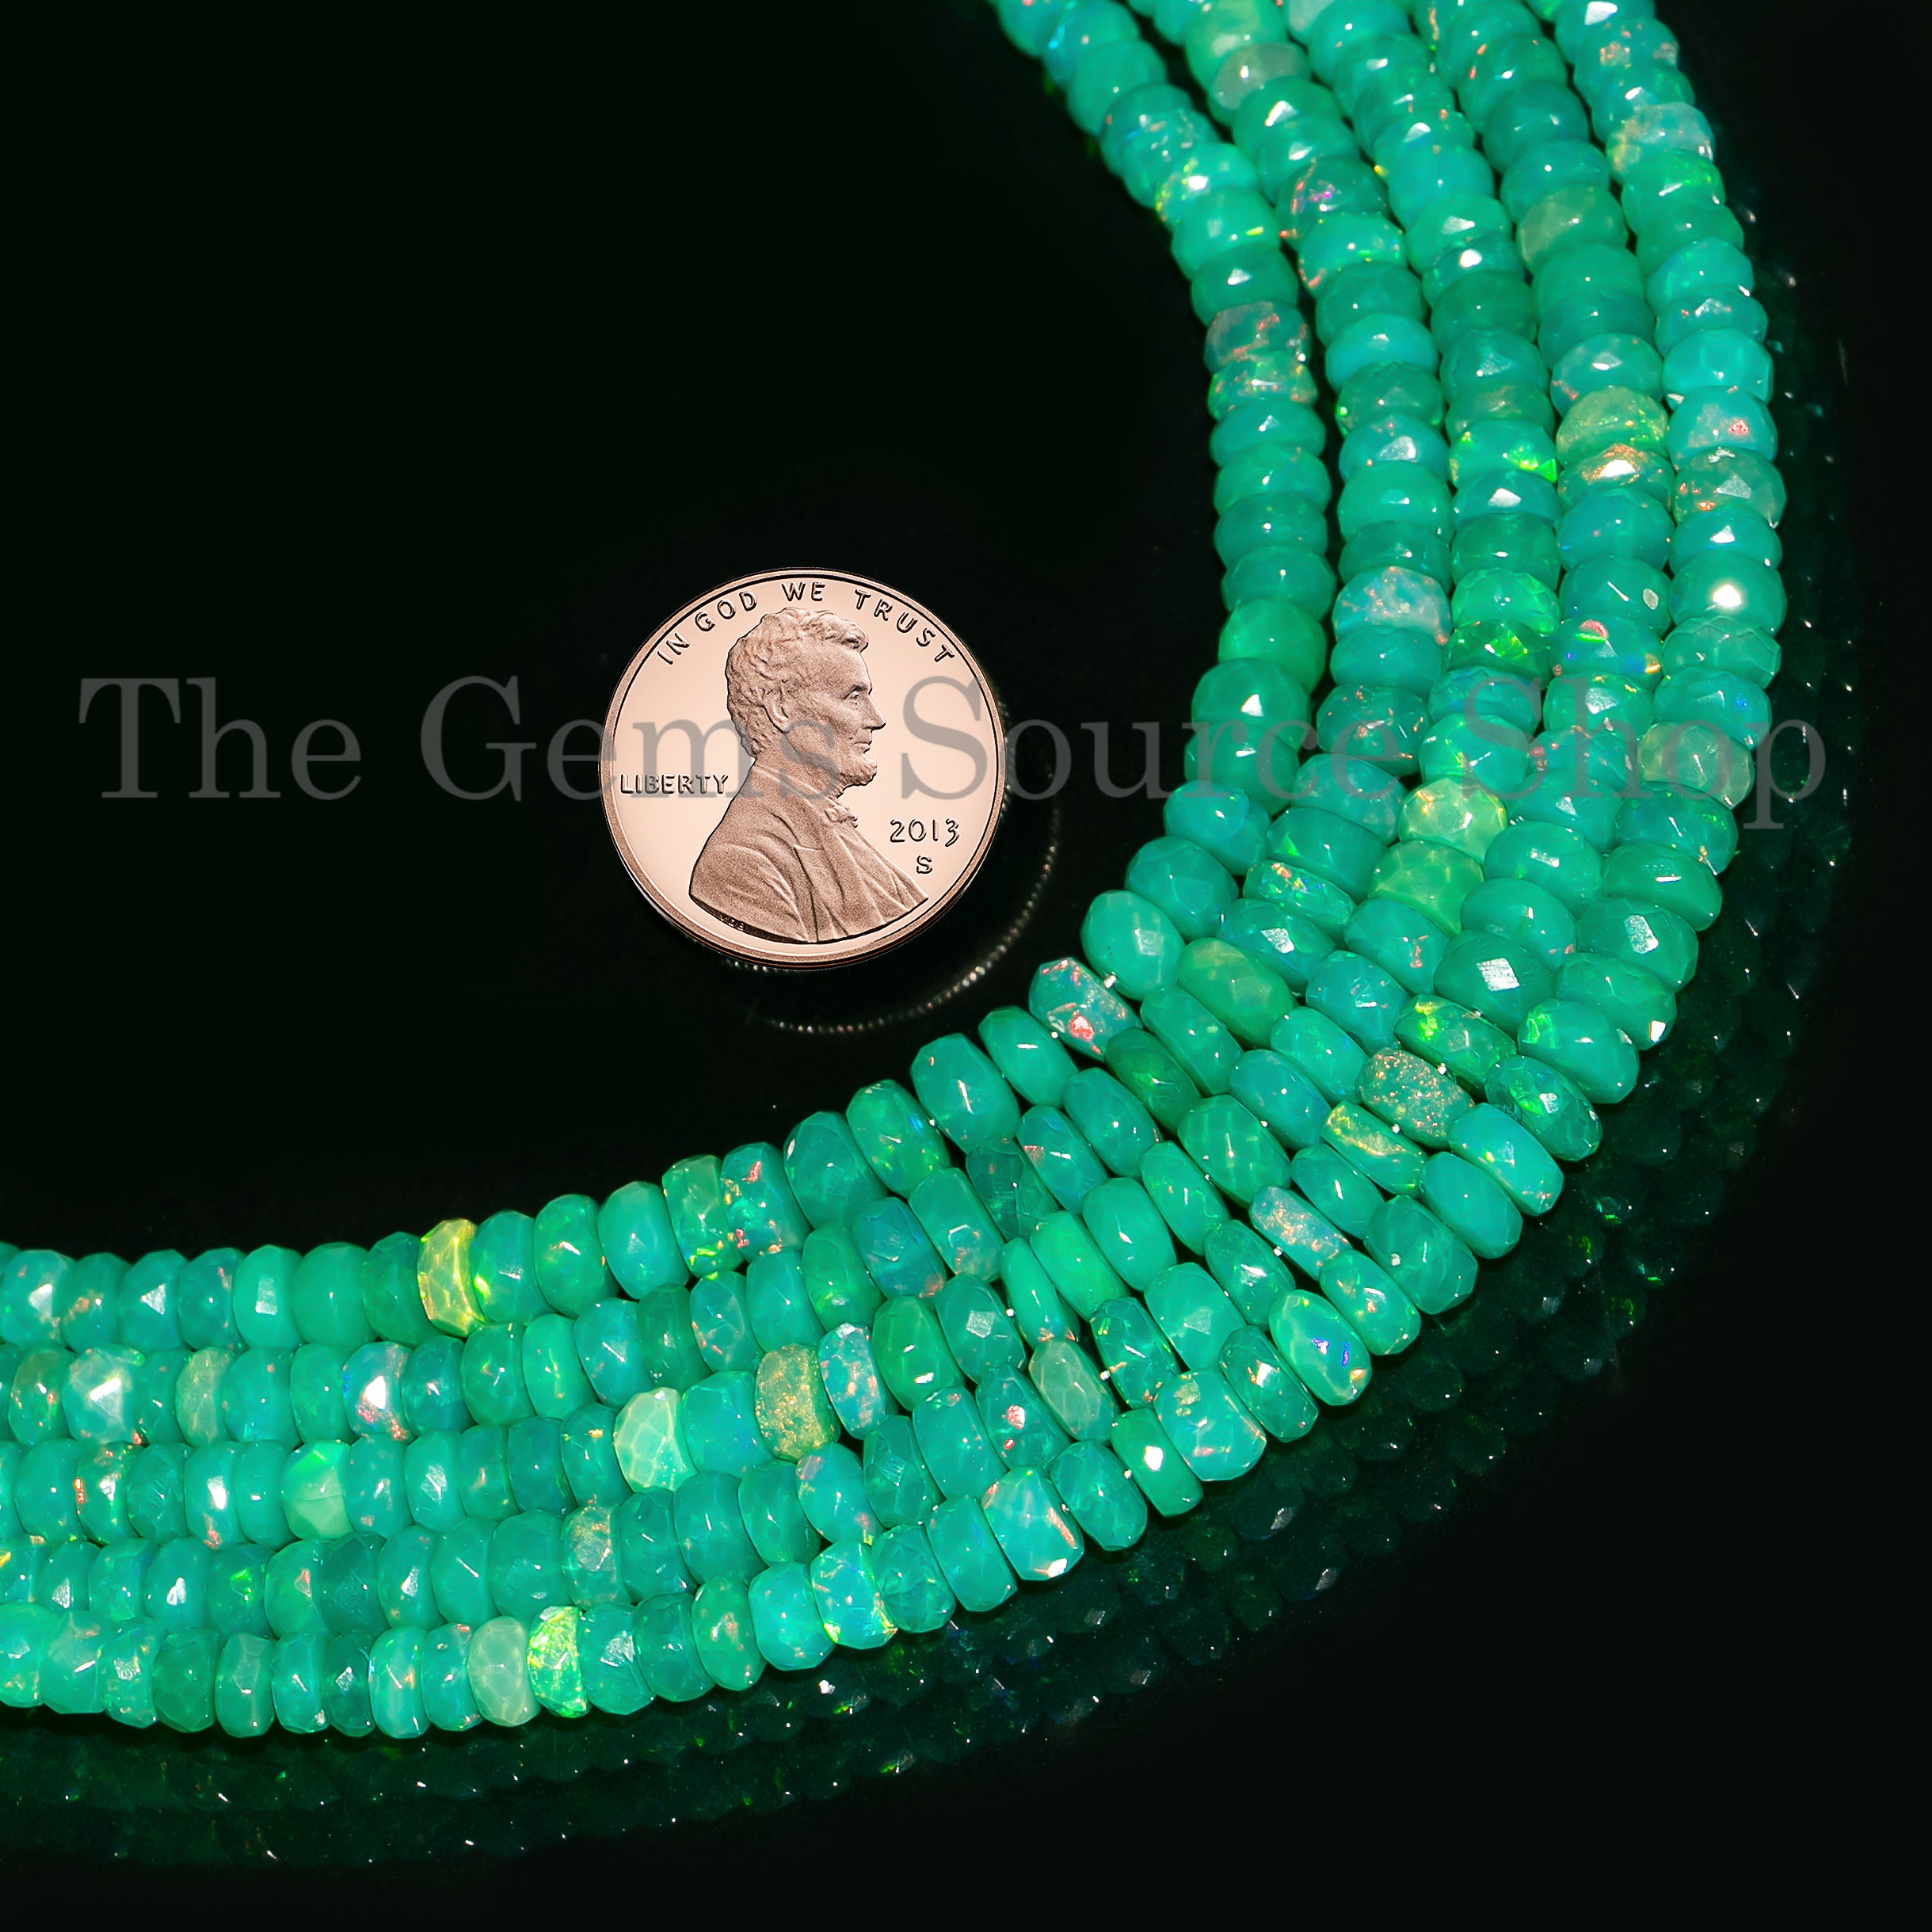 Faceted Green Opal Rondelle Wholesale Beads, TGS-4380